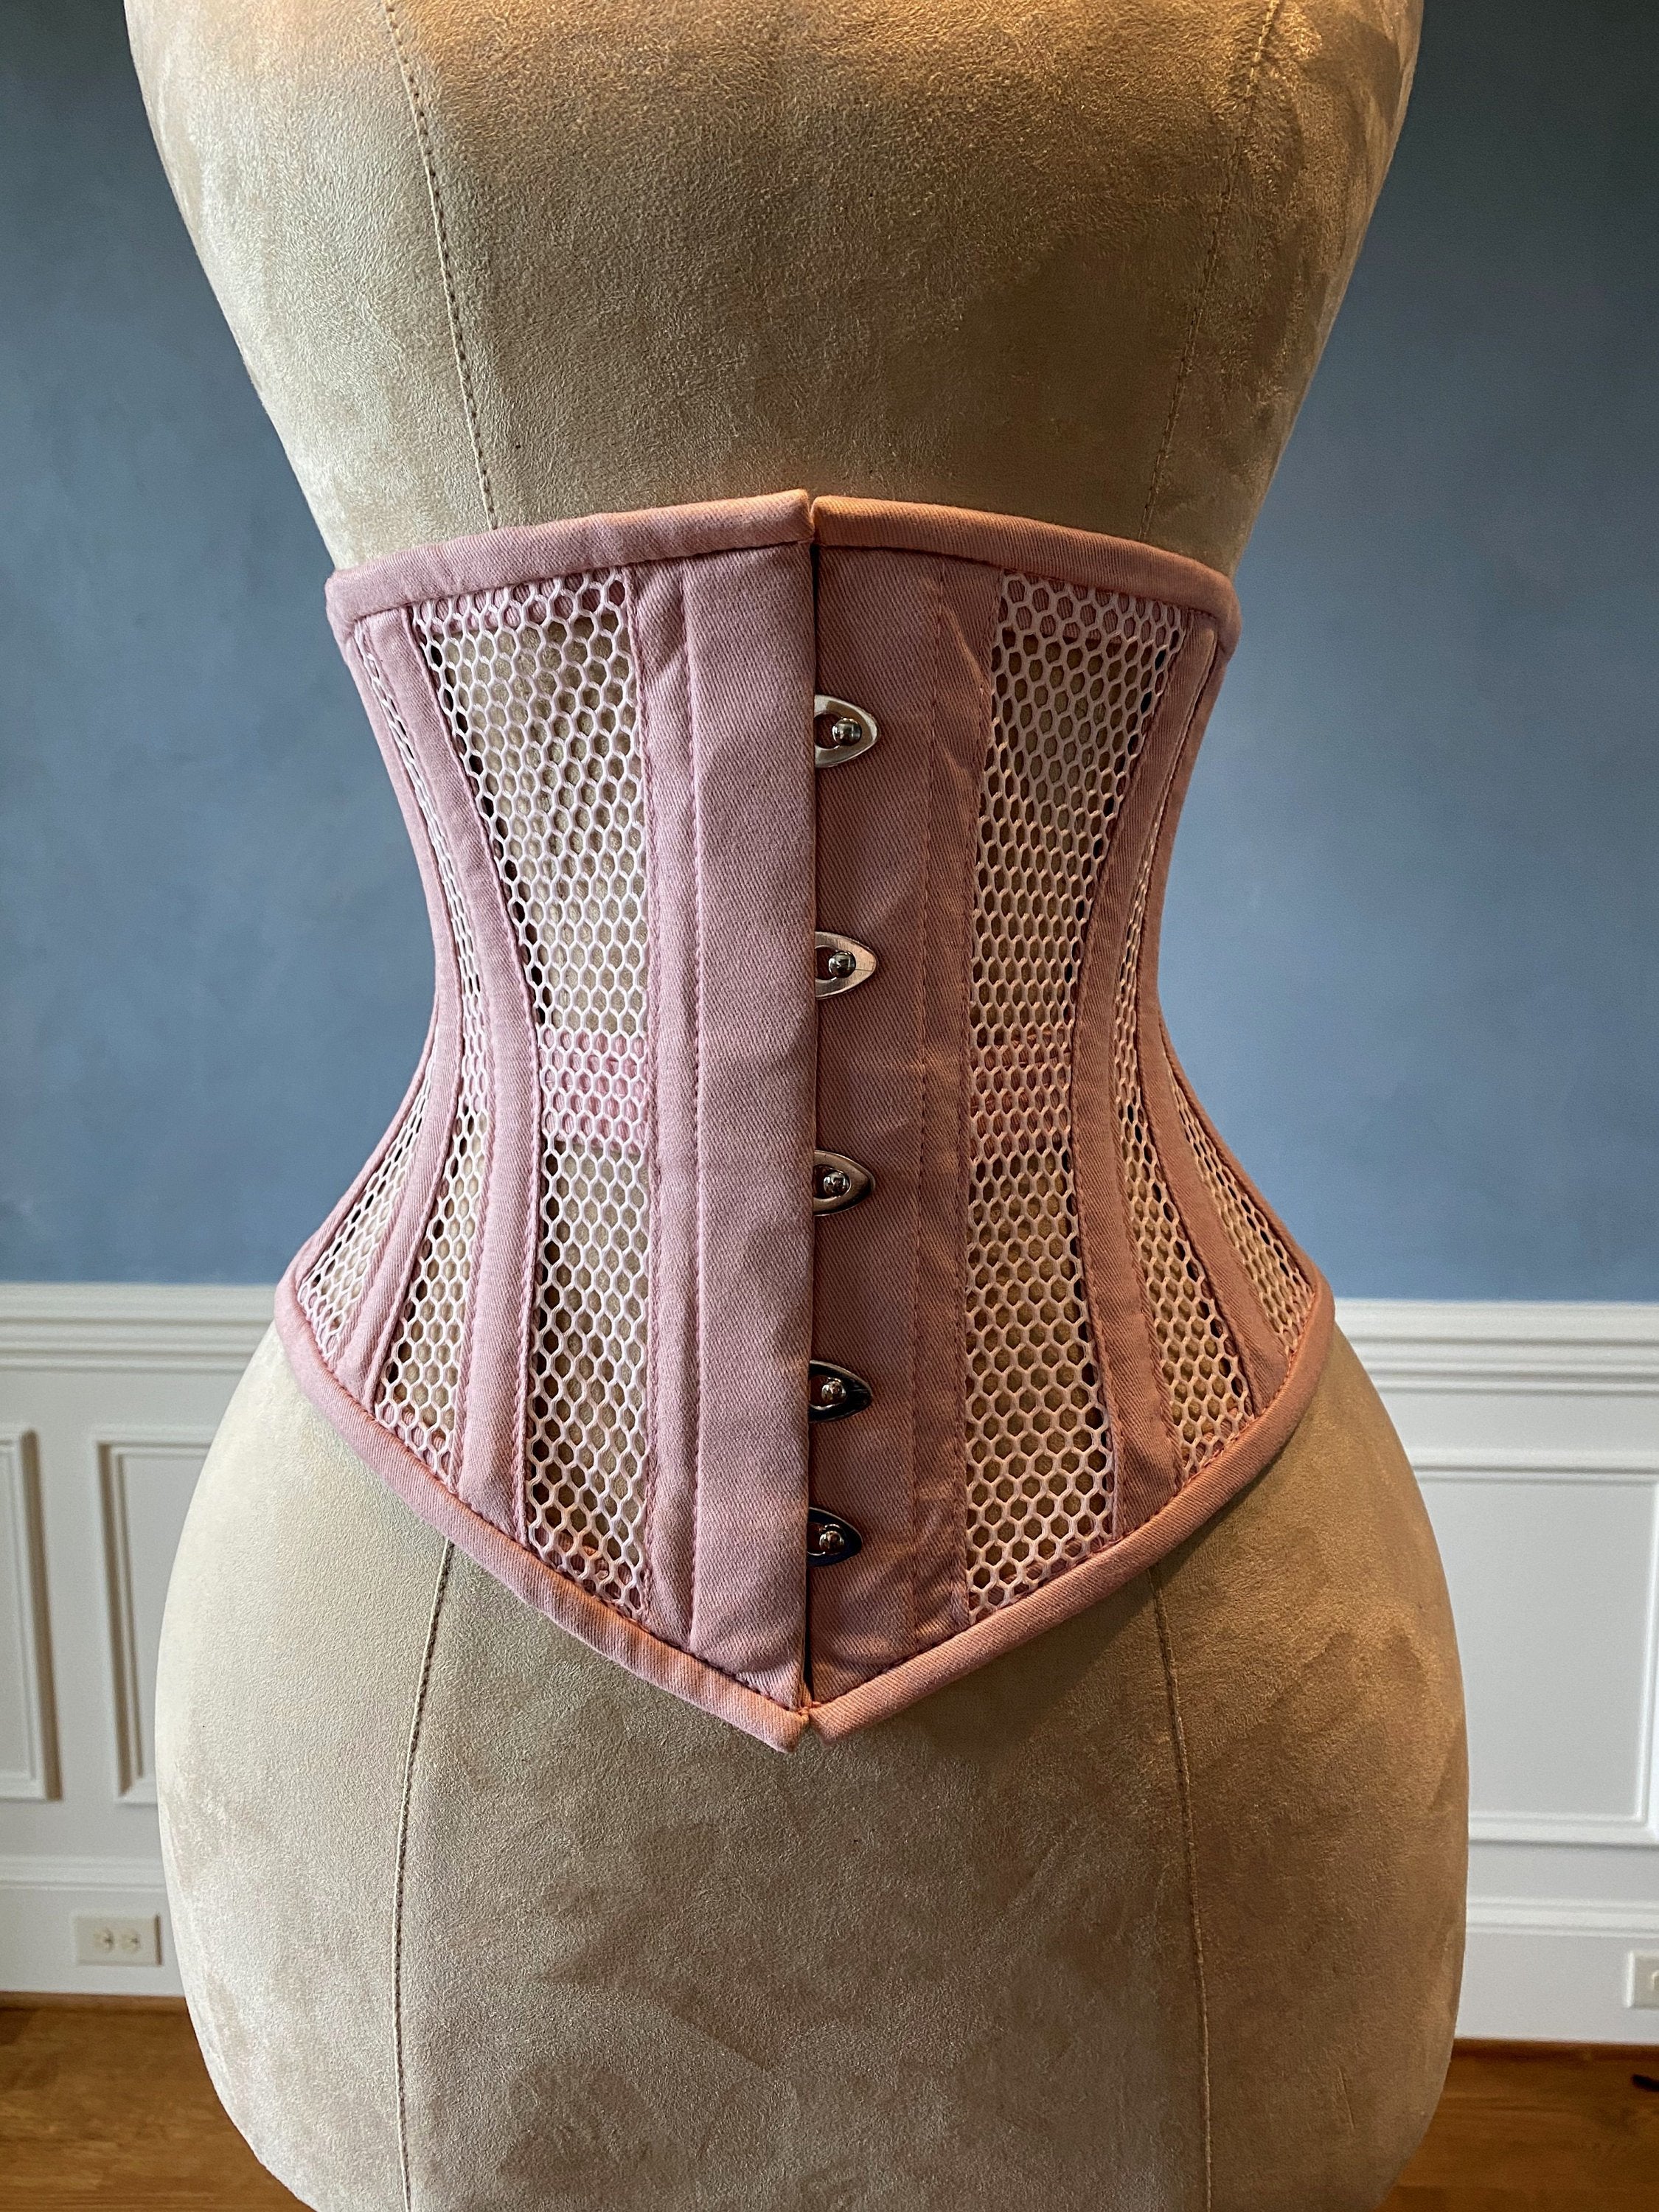 Cotton vintage overbust exclusive corset from Corsettery Western